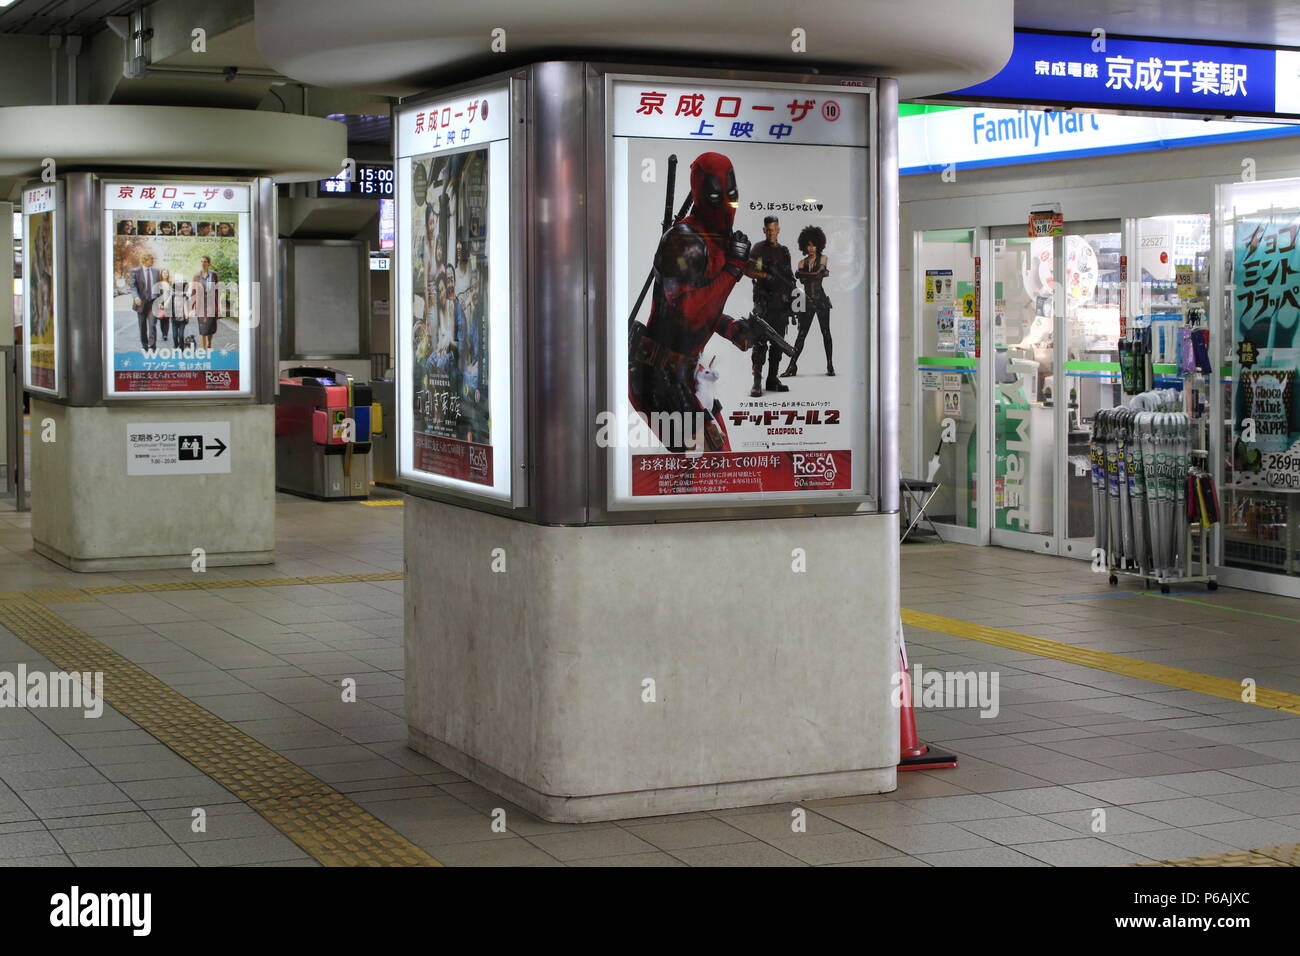 Chiba City Keisei line train station which has a Familymart convenience store and pillars carrying movie adverts including Deadpool 2. (6/2018) Stock Photo